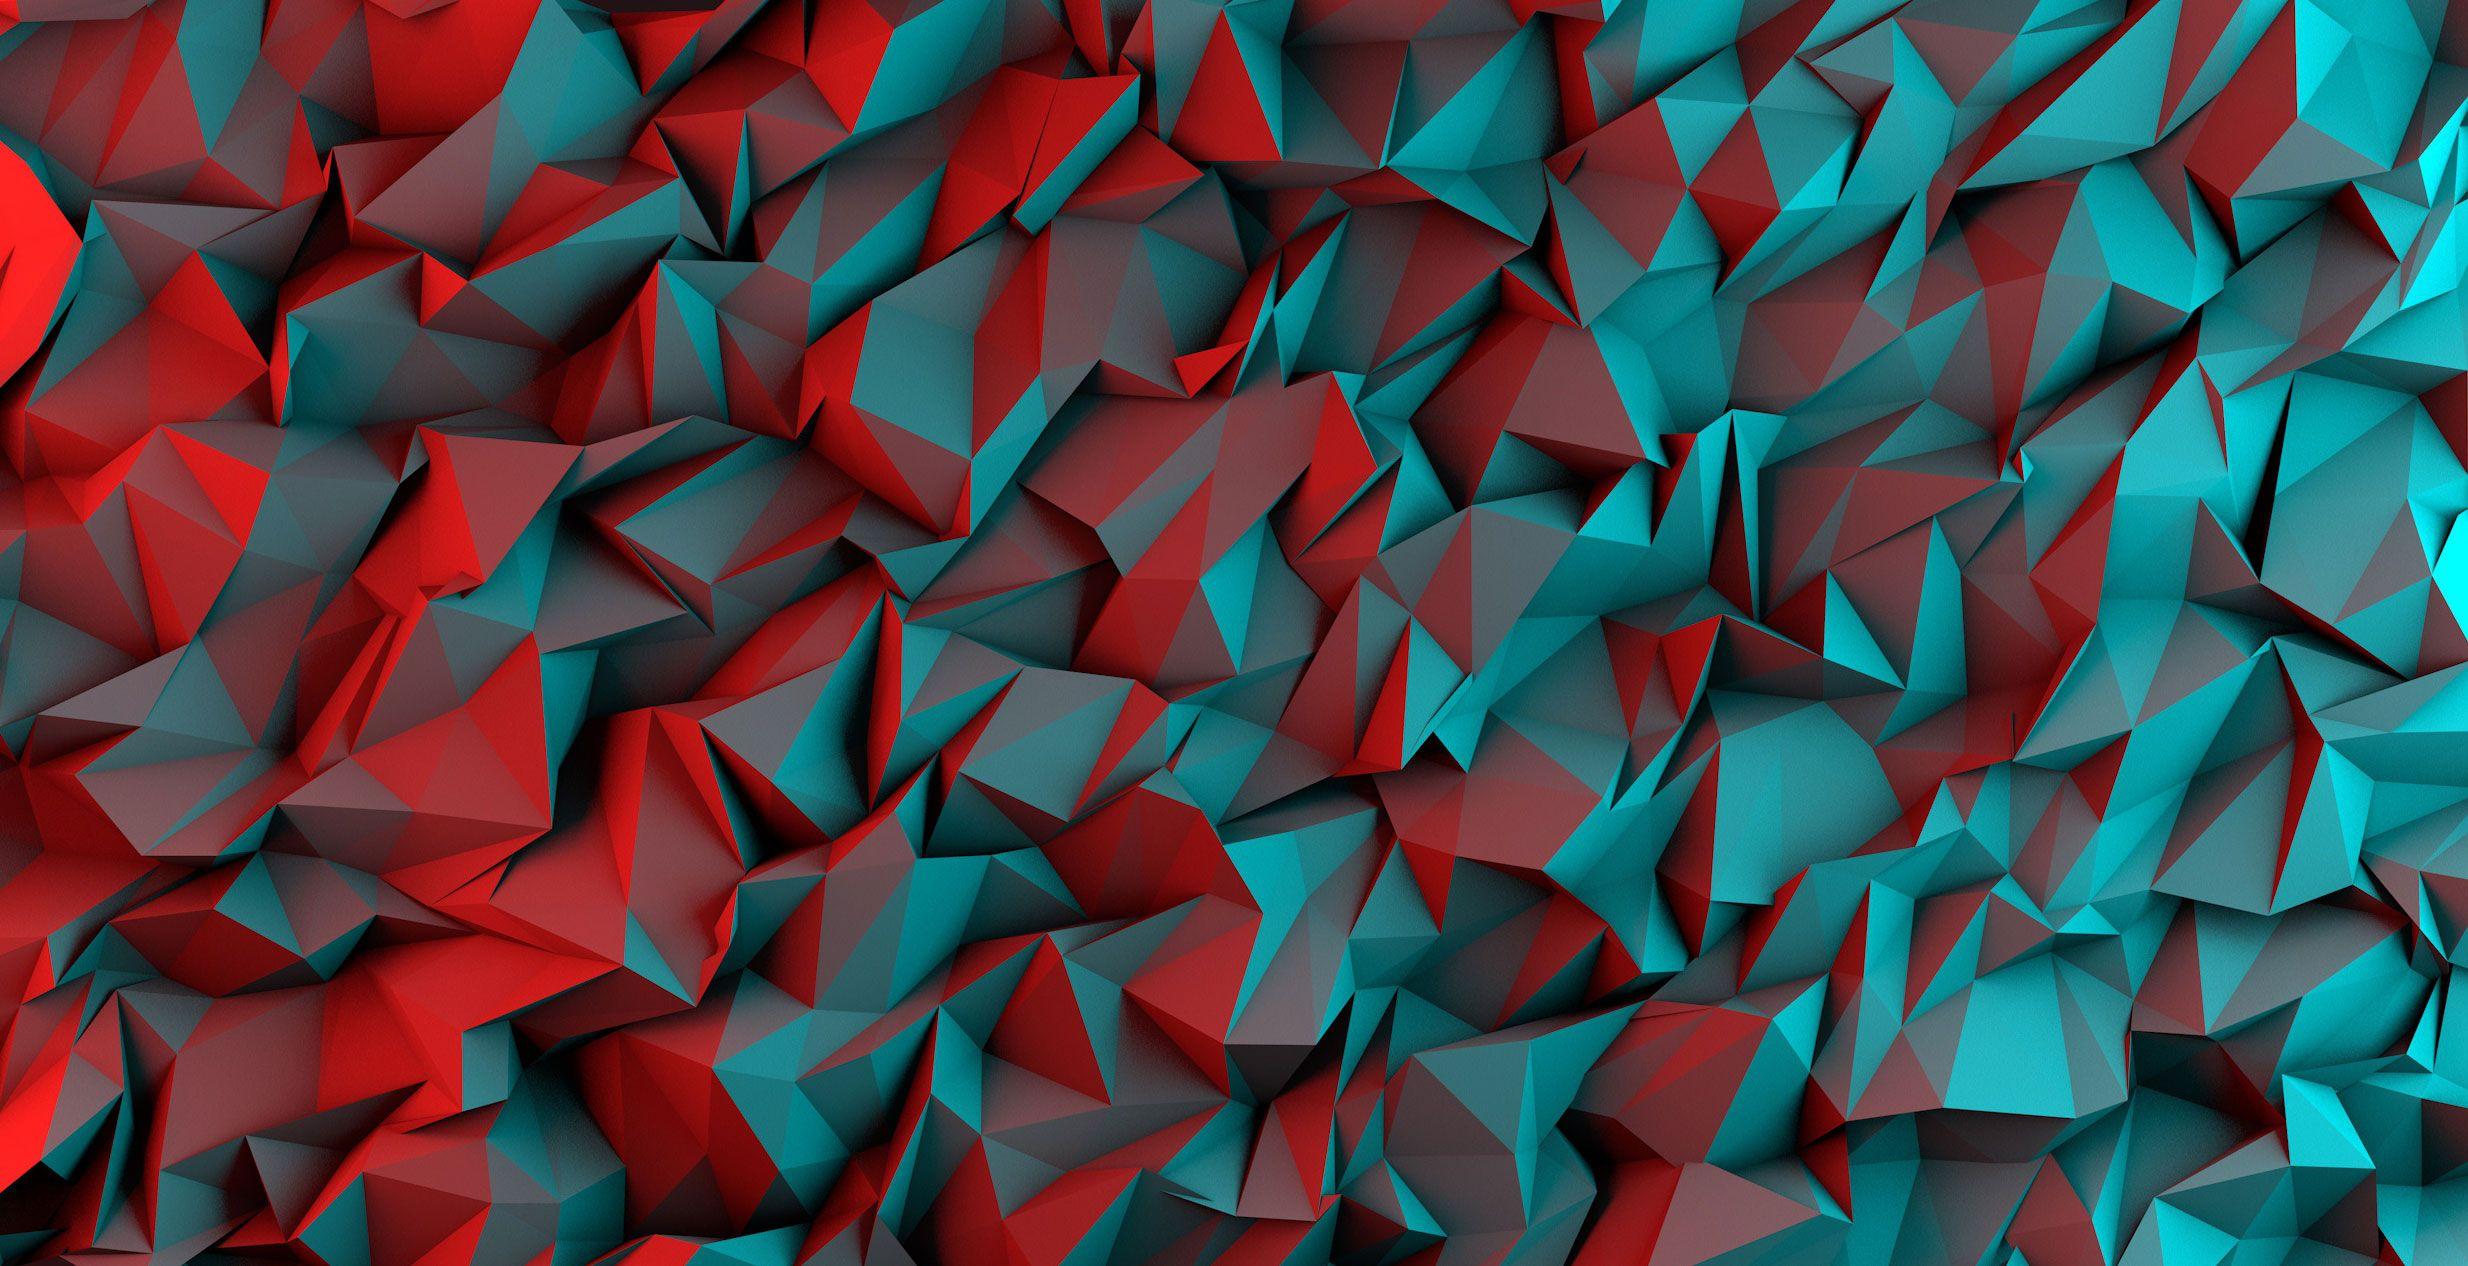 A red and blue abstract background - Low poly